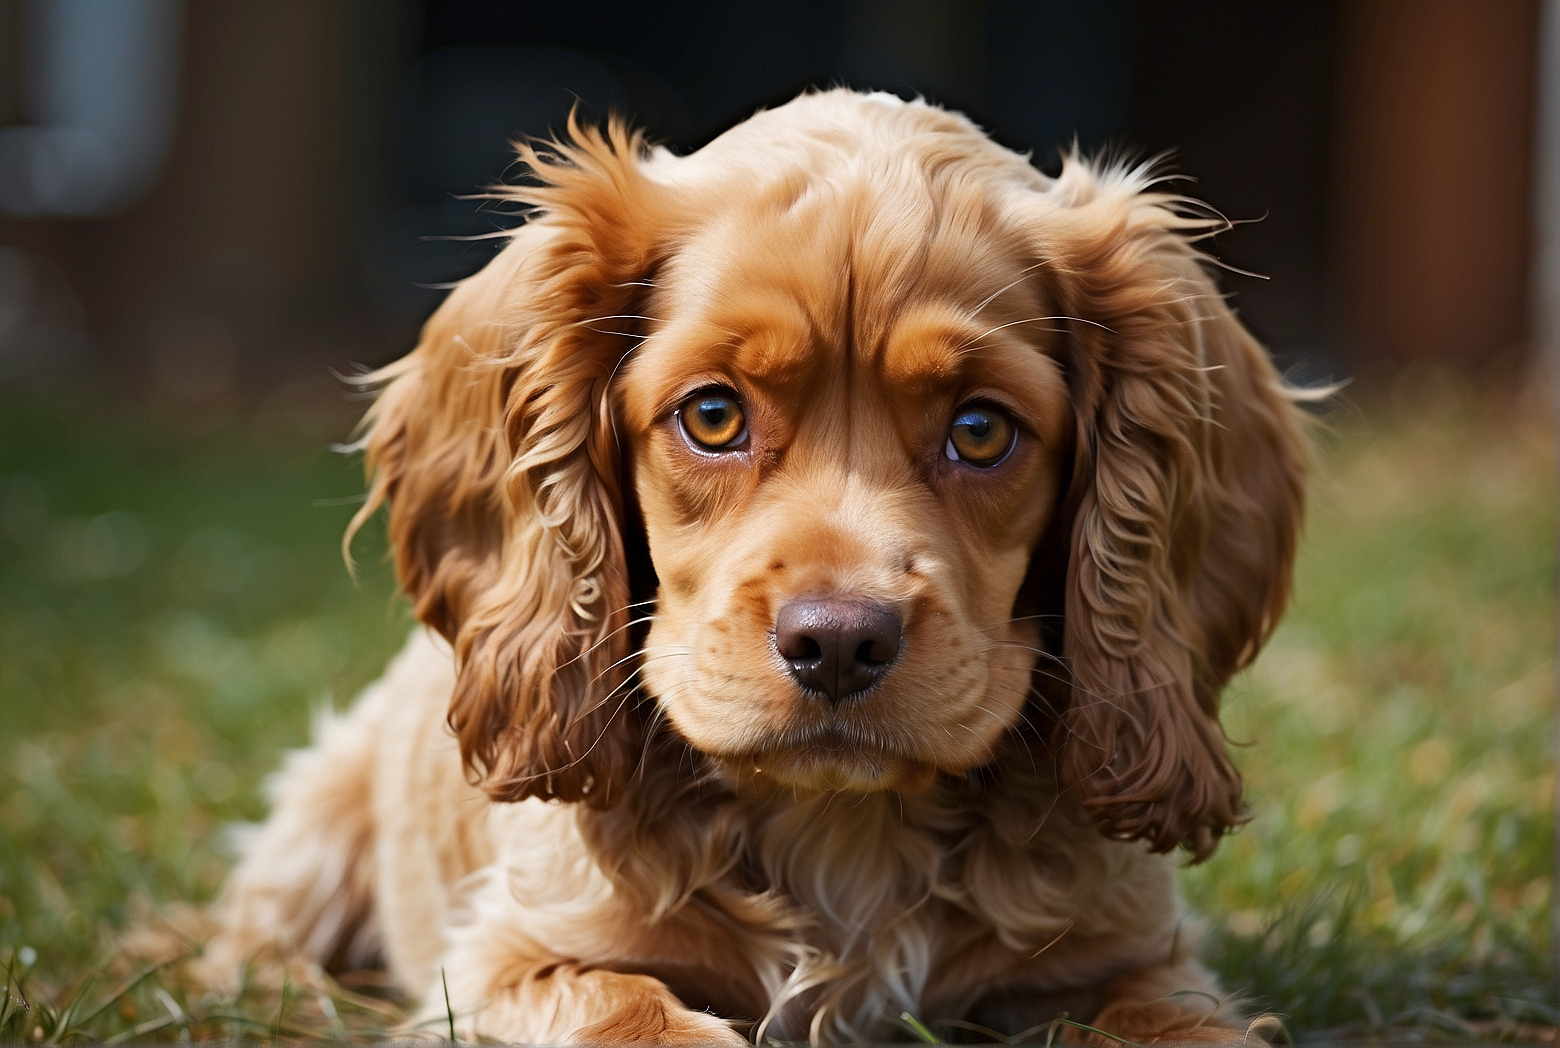 What Color Are Cocker Spaniel Eyes